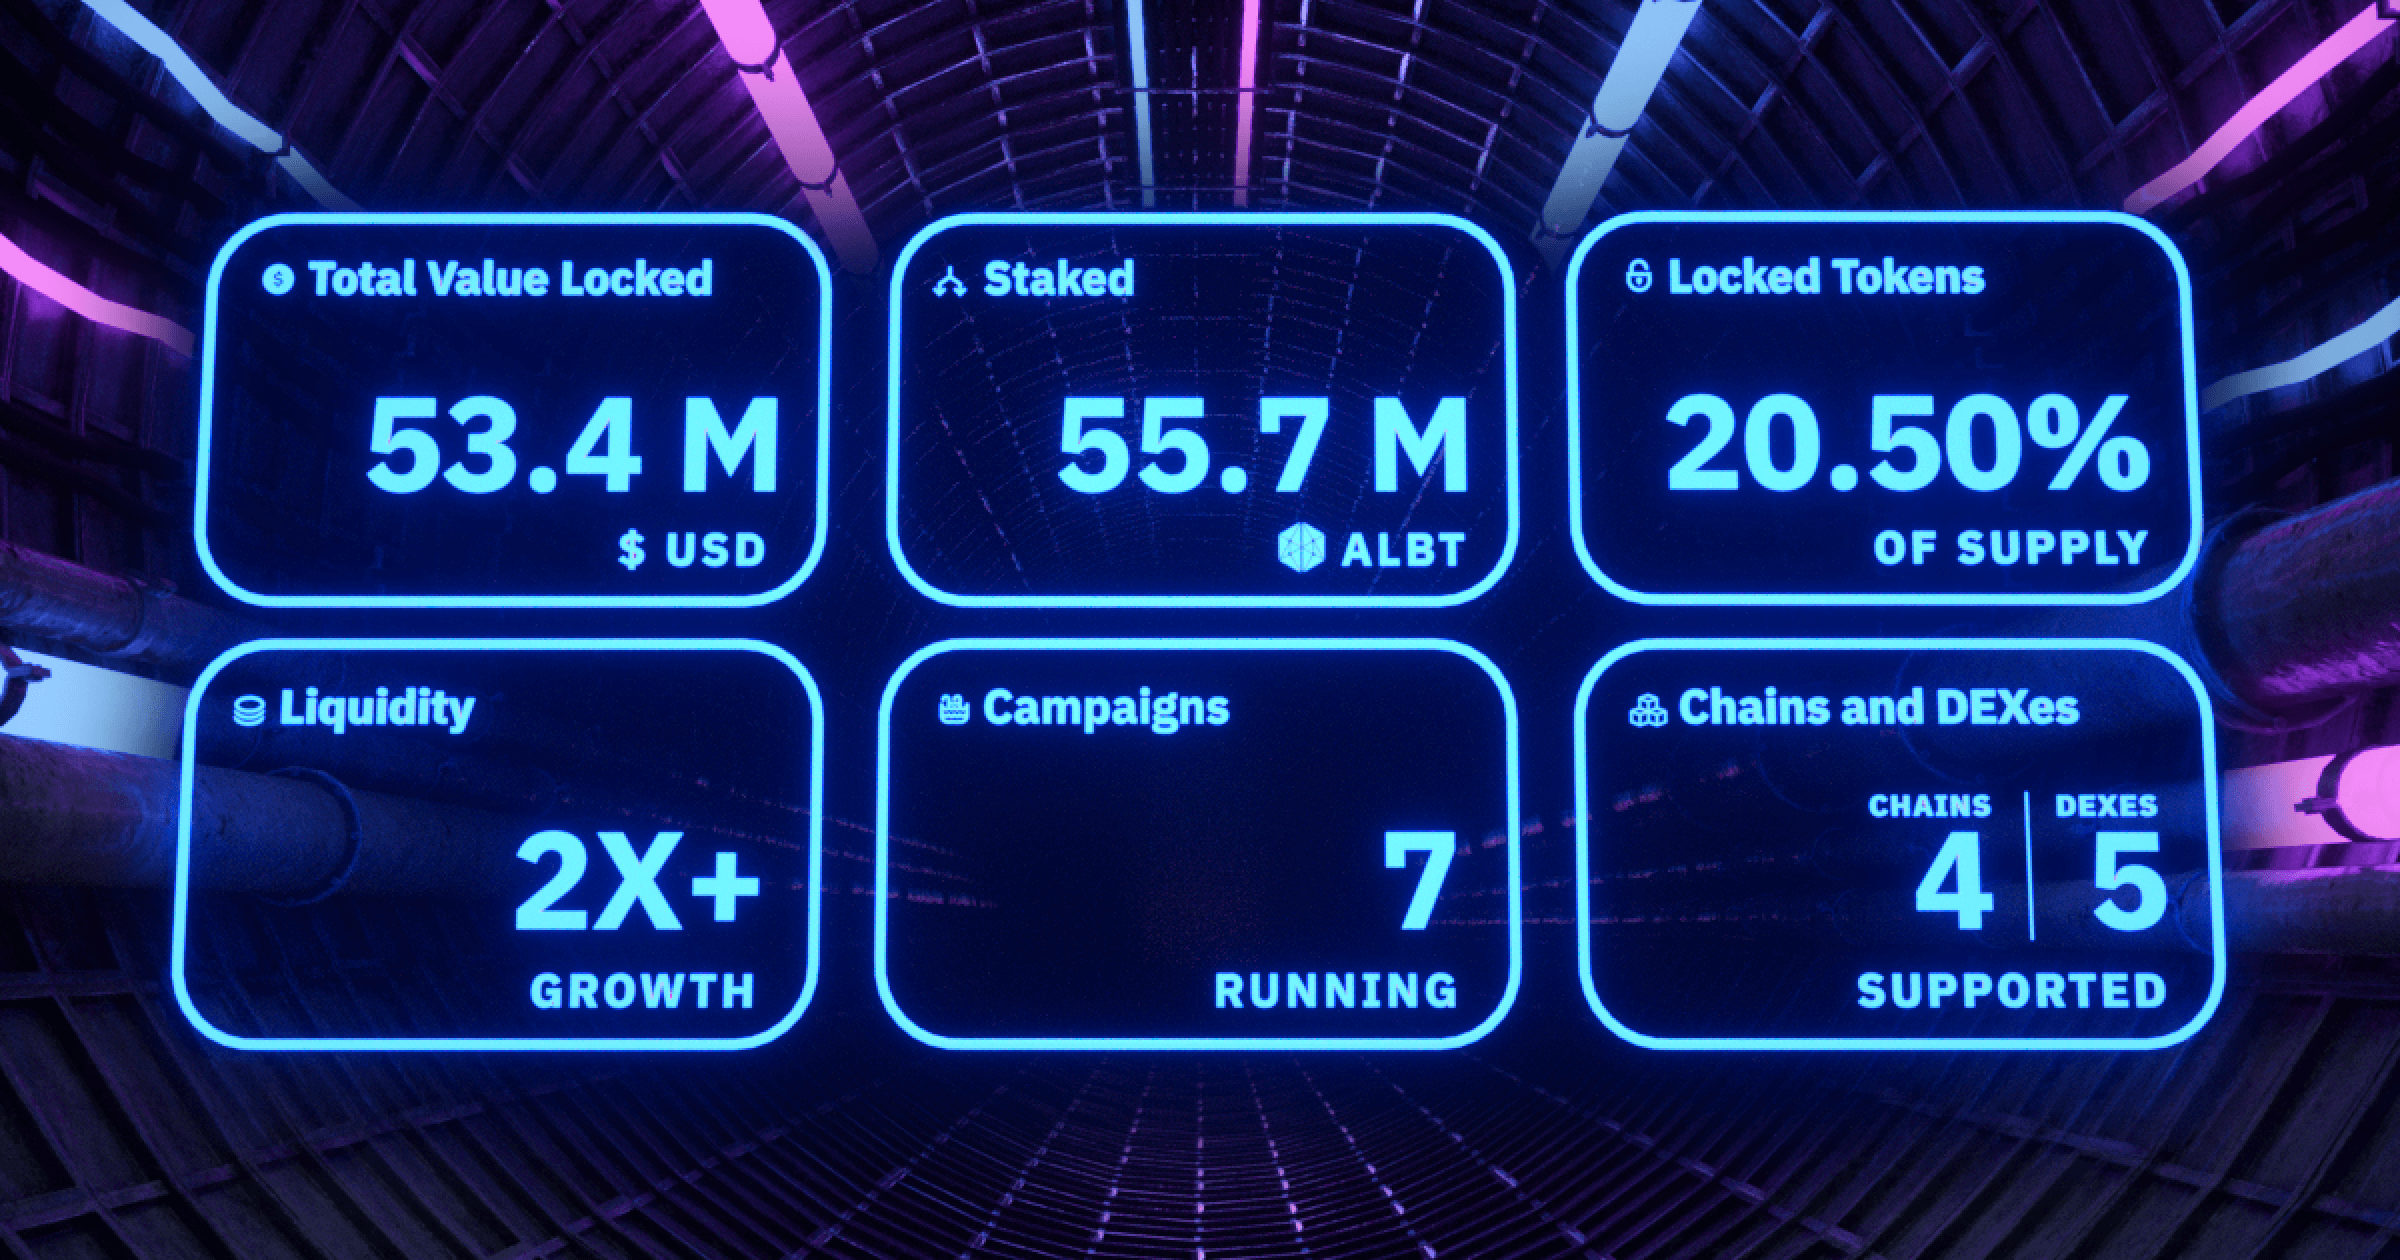 Key statistics for AllianceBlock's own liquidity mining and staking campaigns